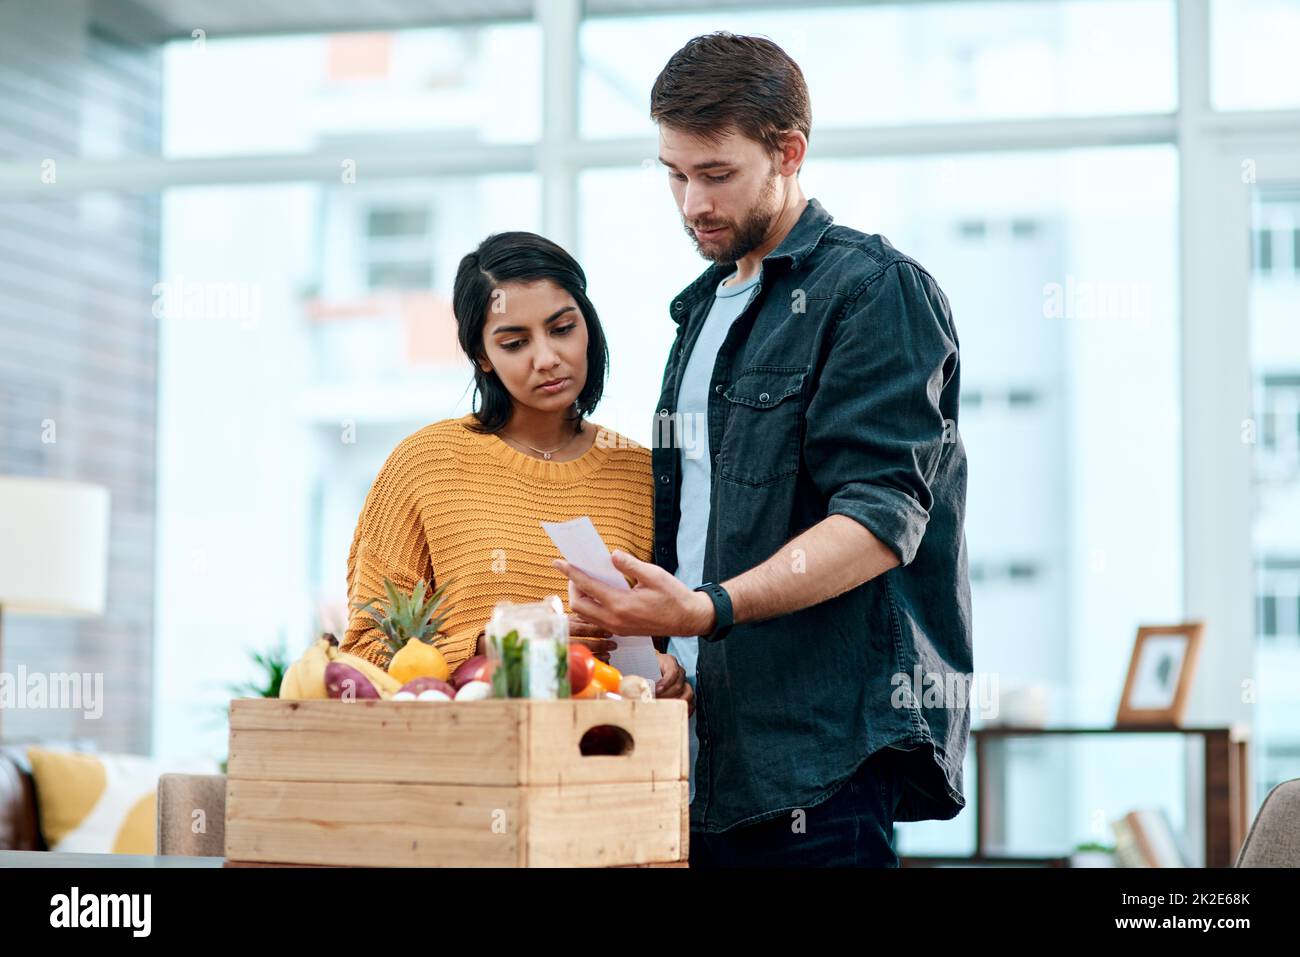 When keeping healthy comes at a cost. Shot of a young couple going through their receipts at home after buying groceries. Stock Photo